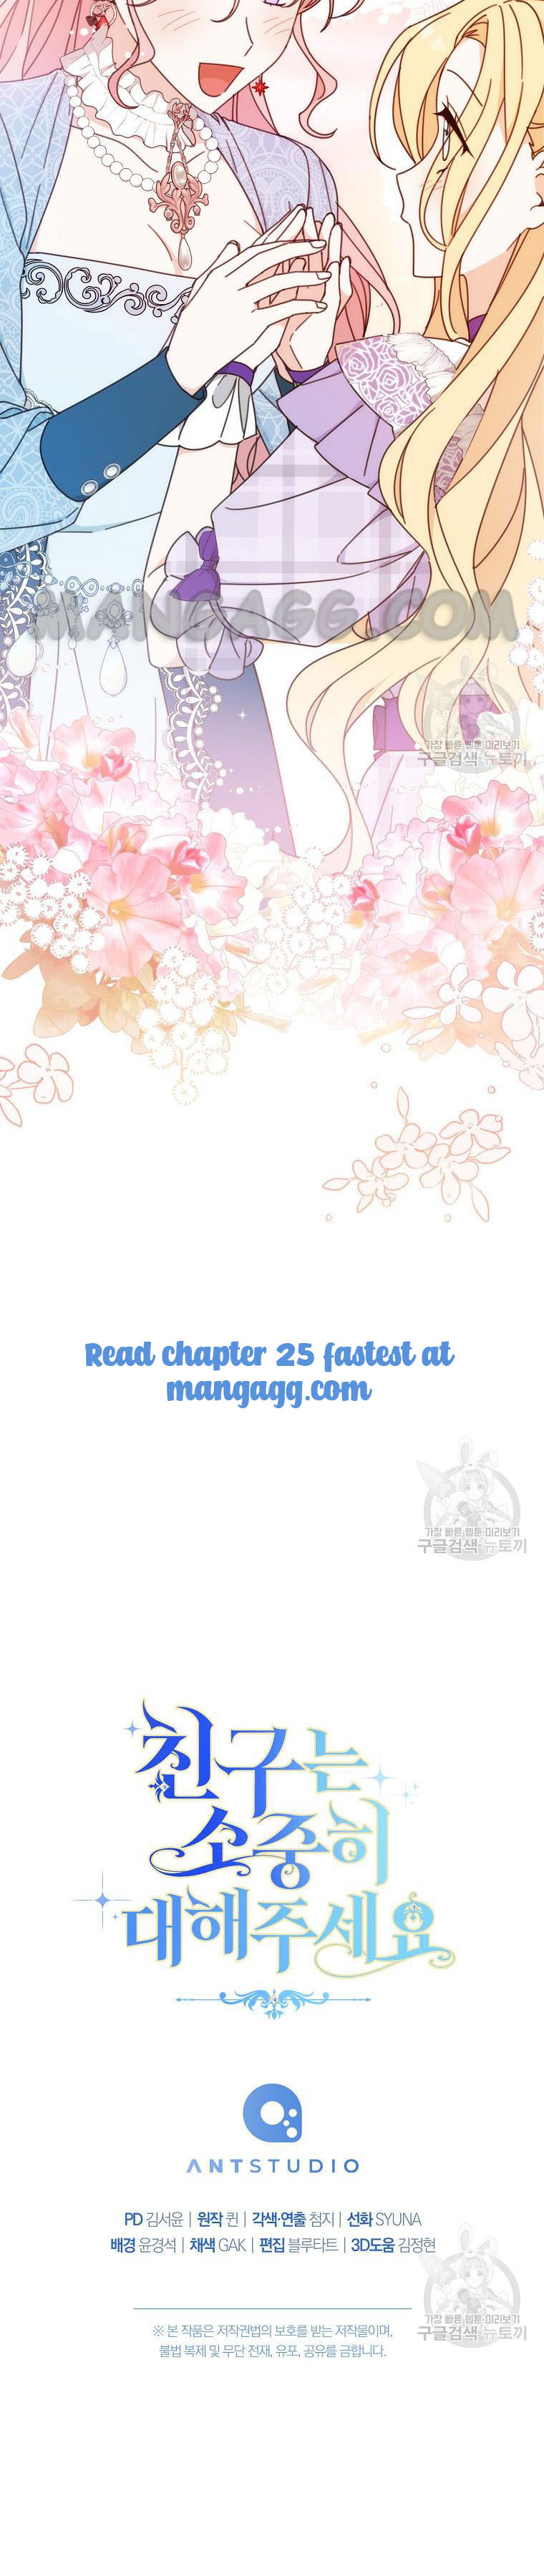 Please Treat Your Friends Preciously chapter 24